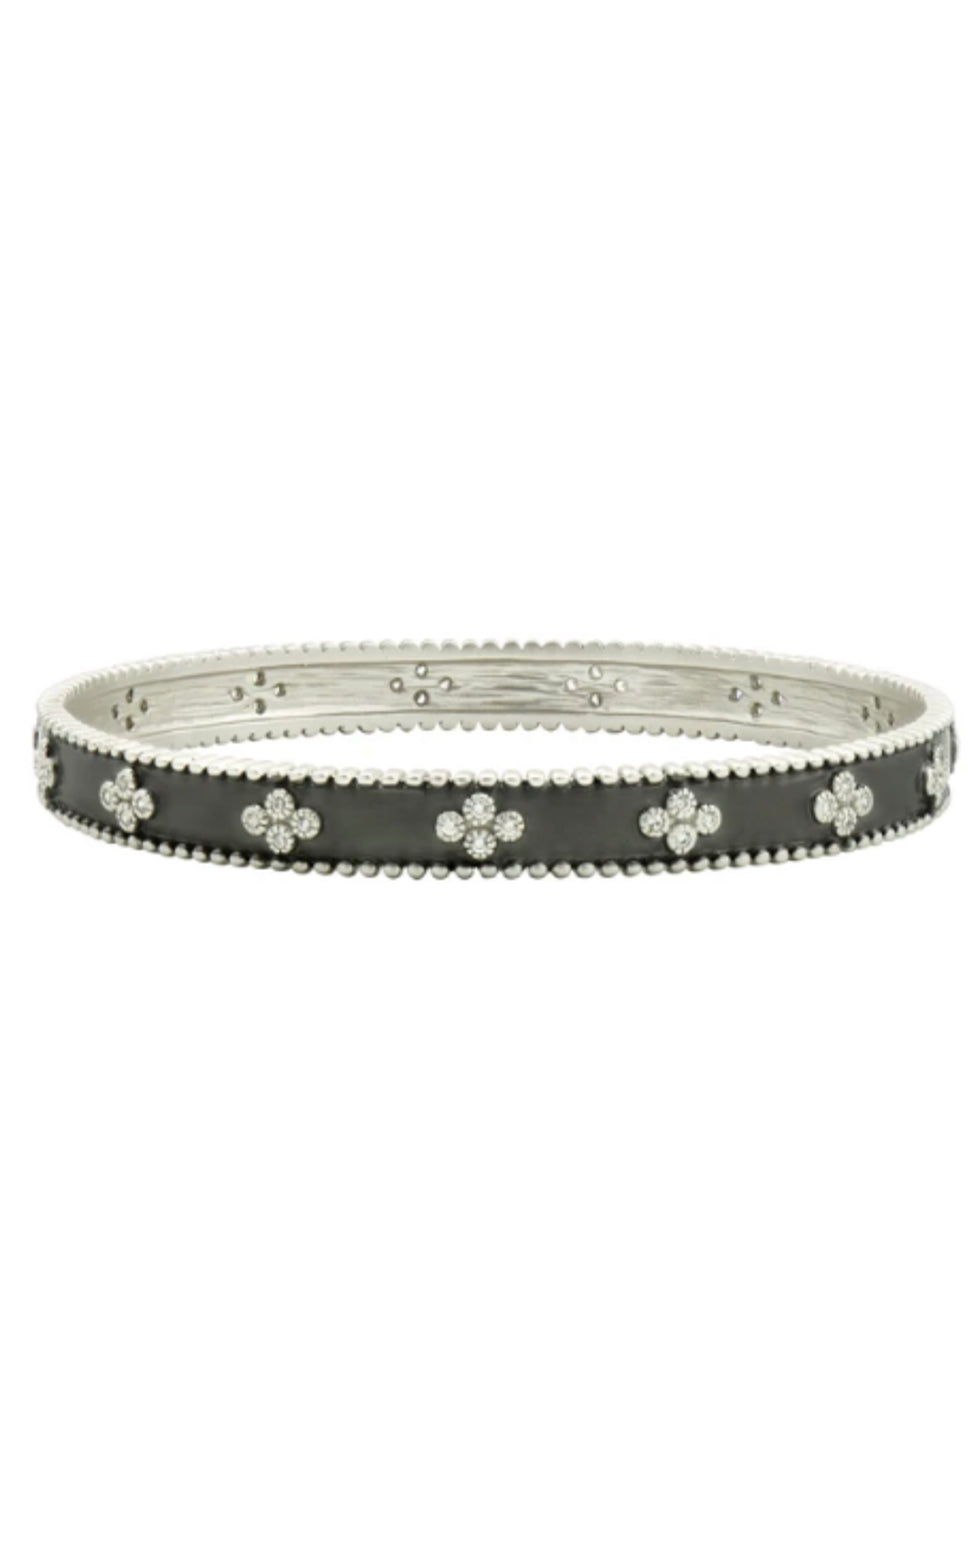 Clover Beaded Bangle - Silver and Black